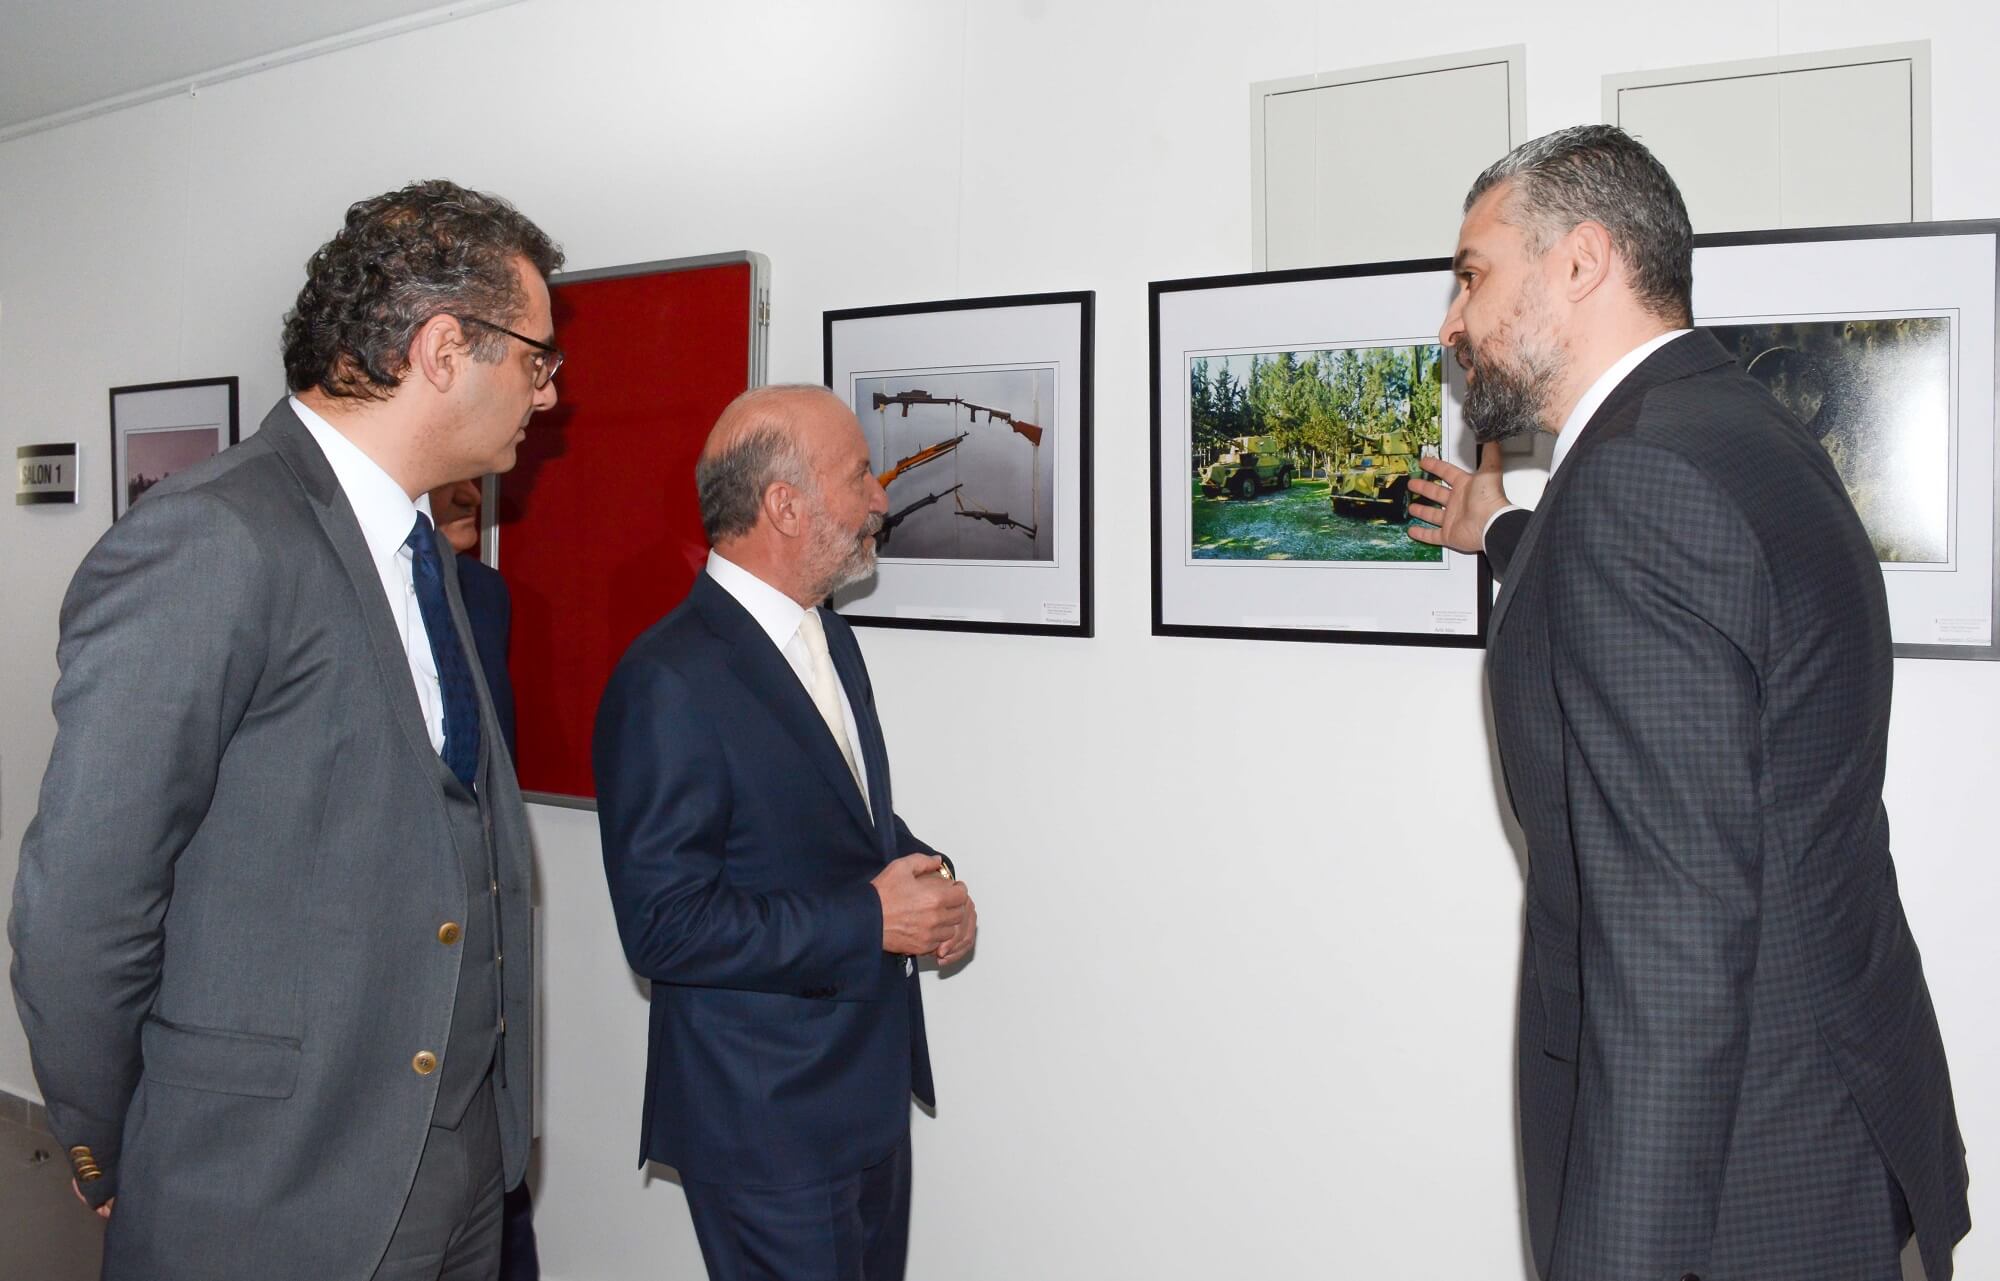 Cyprus Turkish National Struggle themed Photography Contest Exhibition with 190 Photographs of 50 Artists opened by Prime Minister Tufan Erhürman